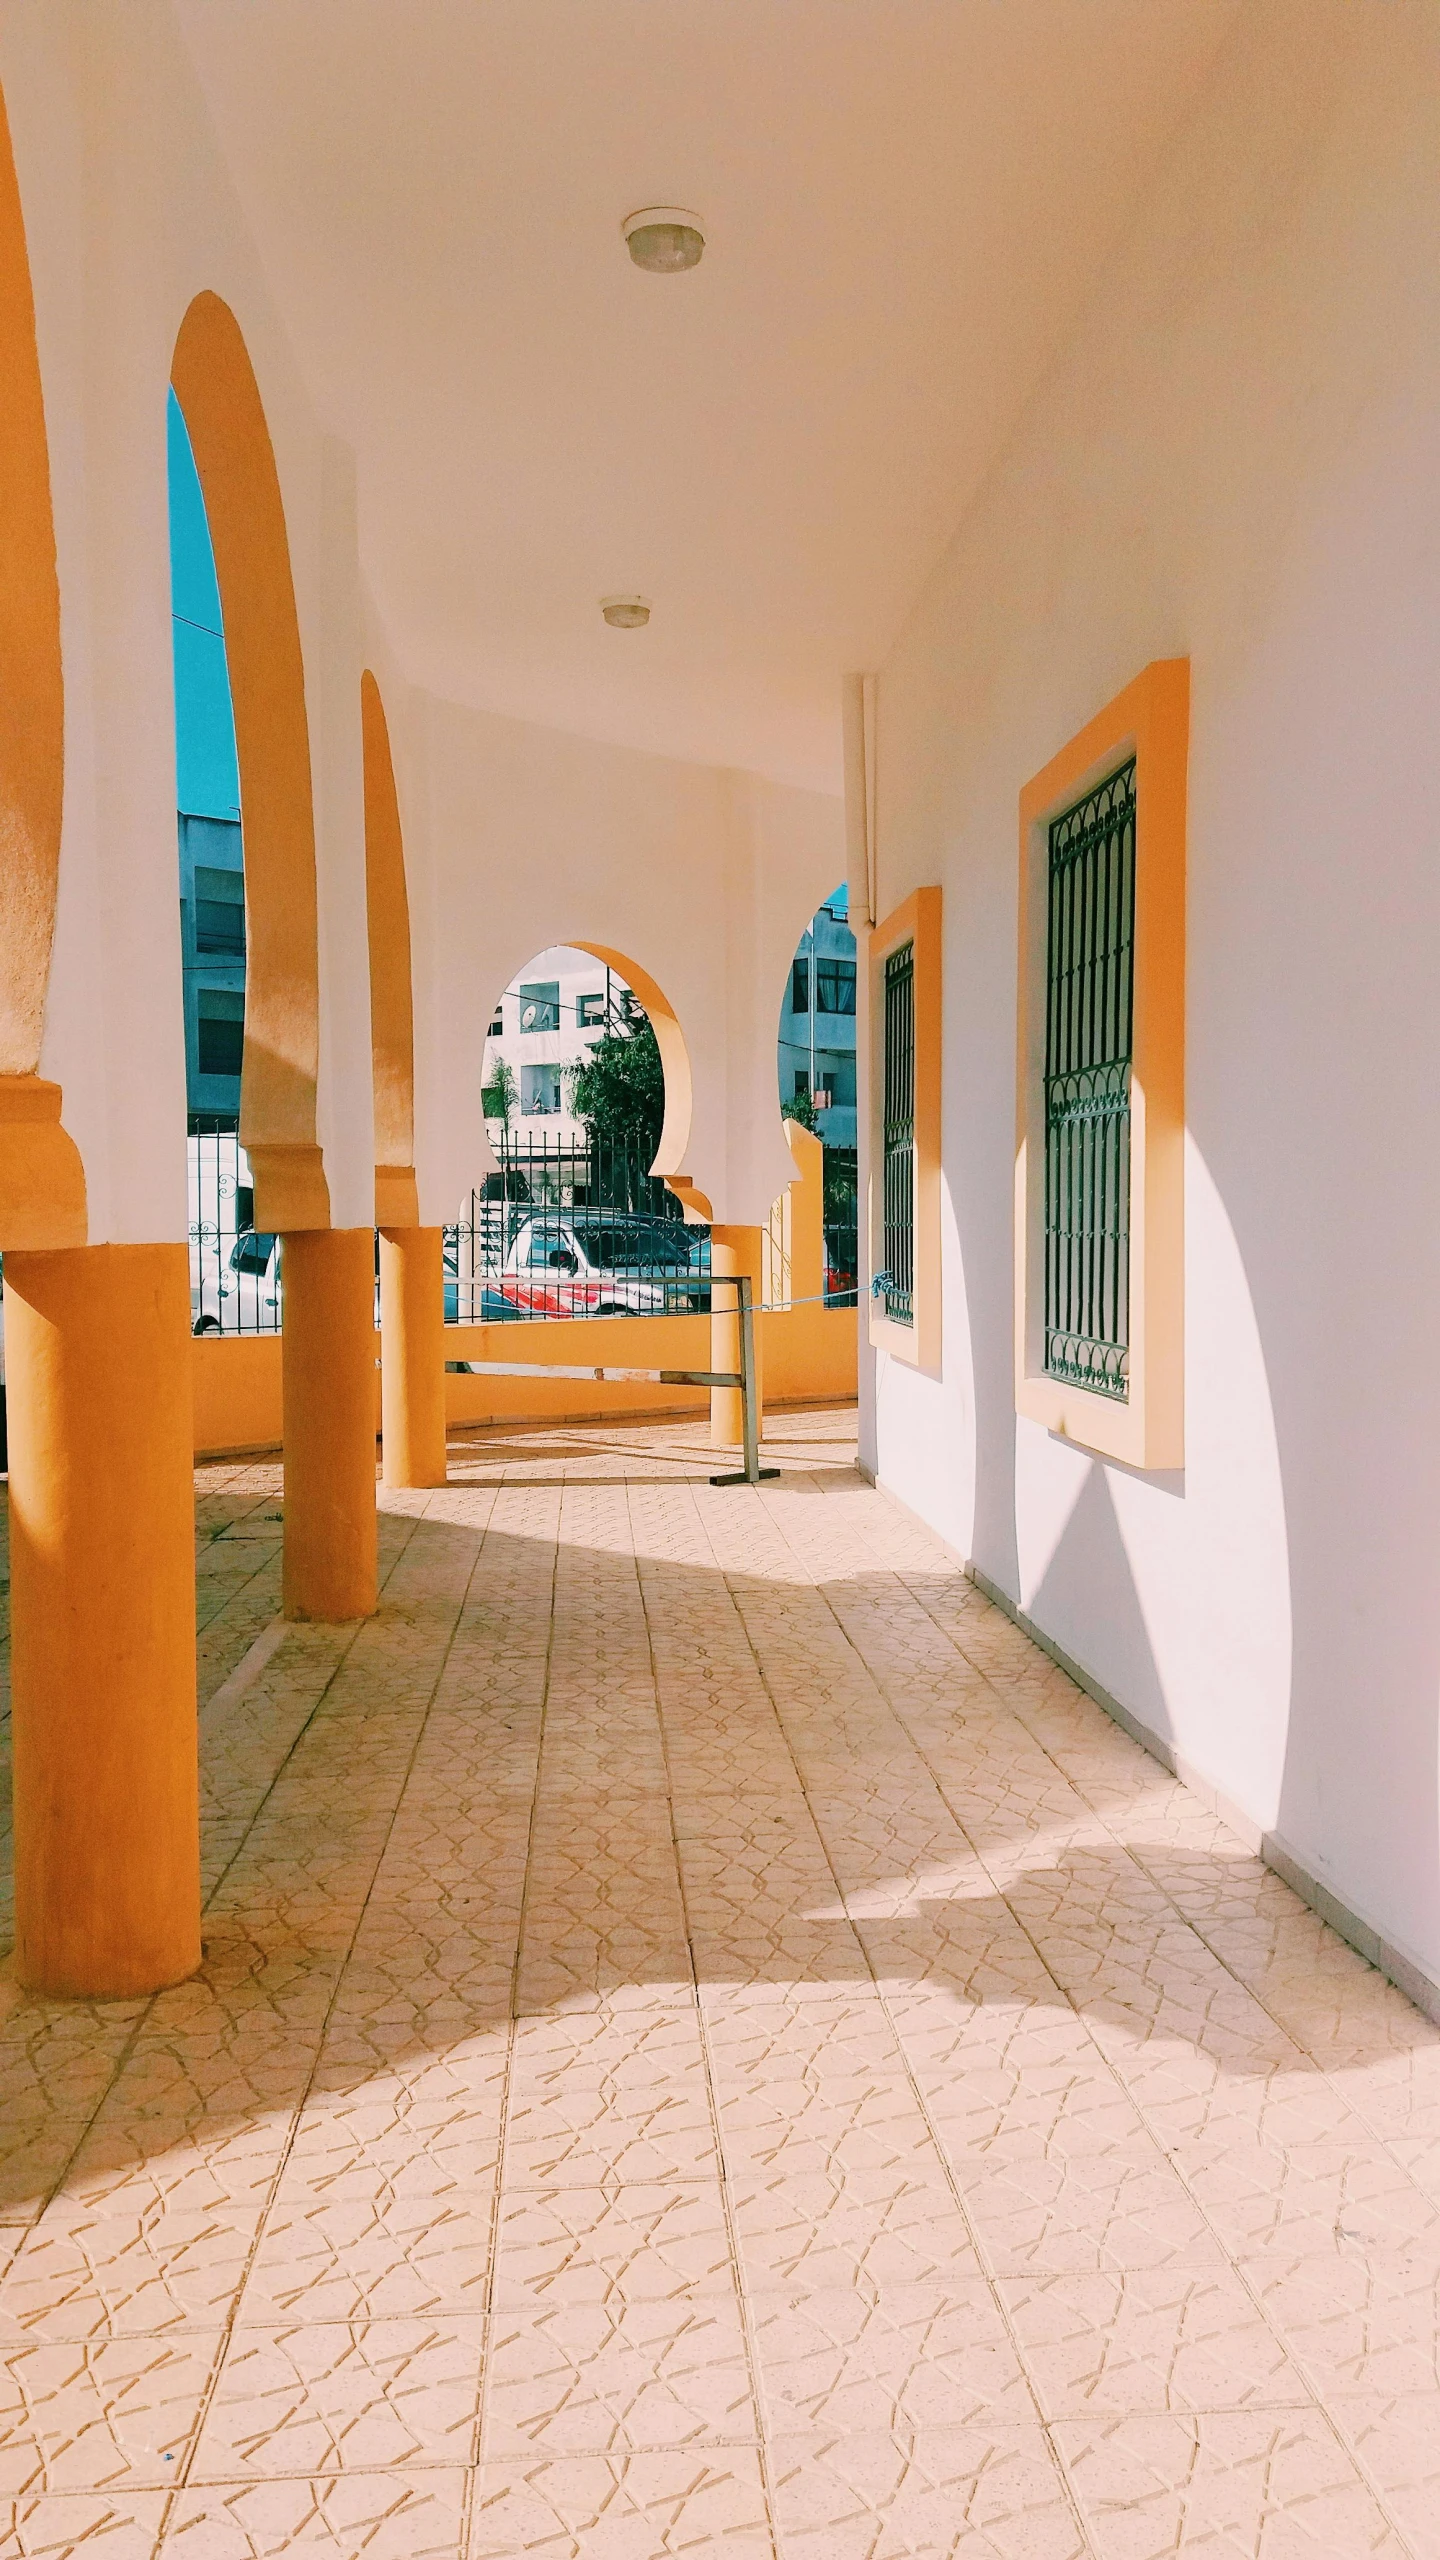 a white and yellow building with columns and windows, a photo, by Ahmed Yacoubi, unsplash, light and space, summer street near a beach, 80s interior with arched windows, 15081959 21121991 01012000 4k, taken on iphone 1 3 pro